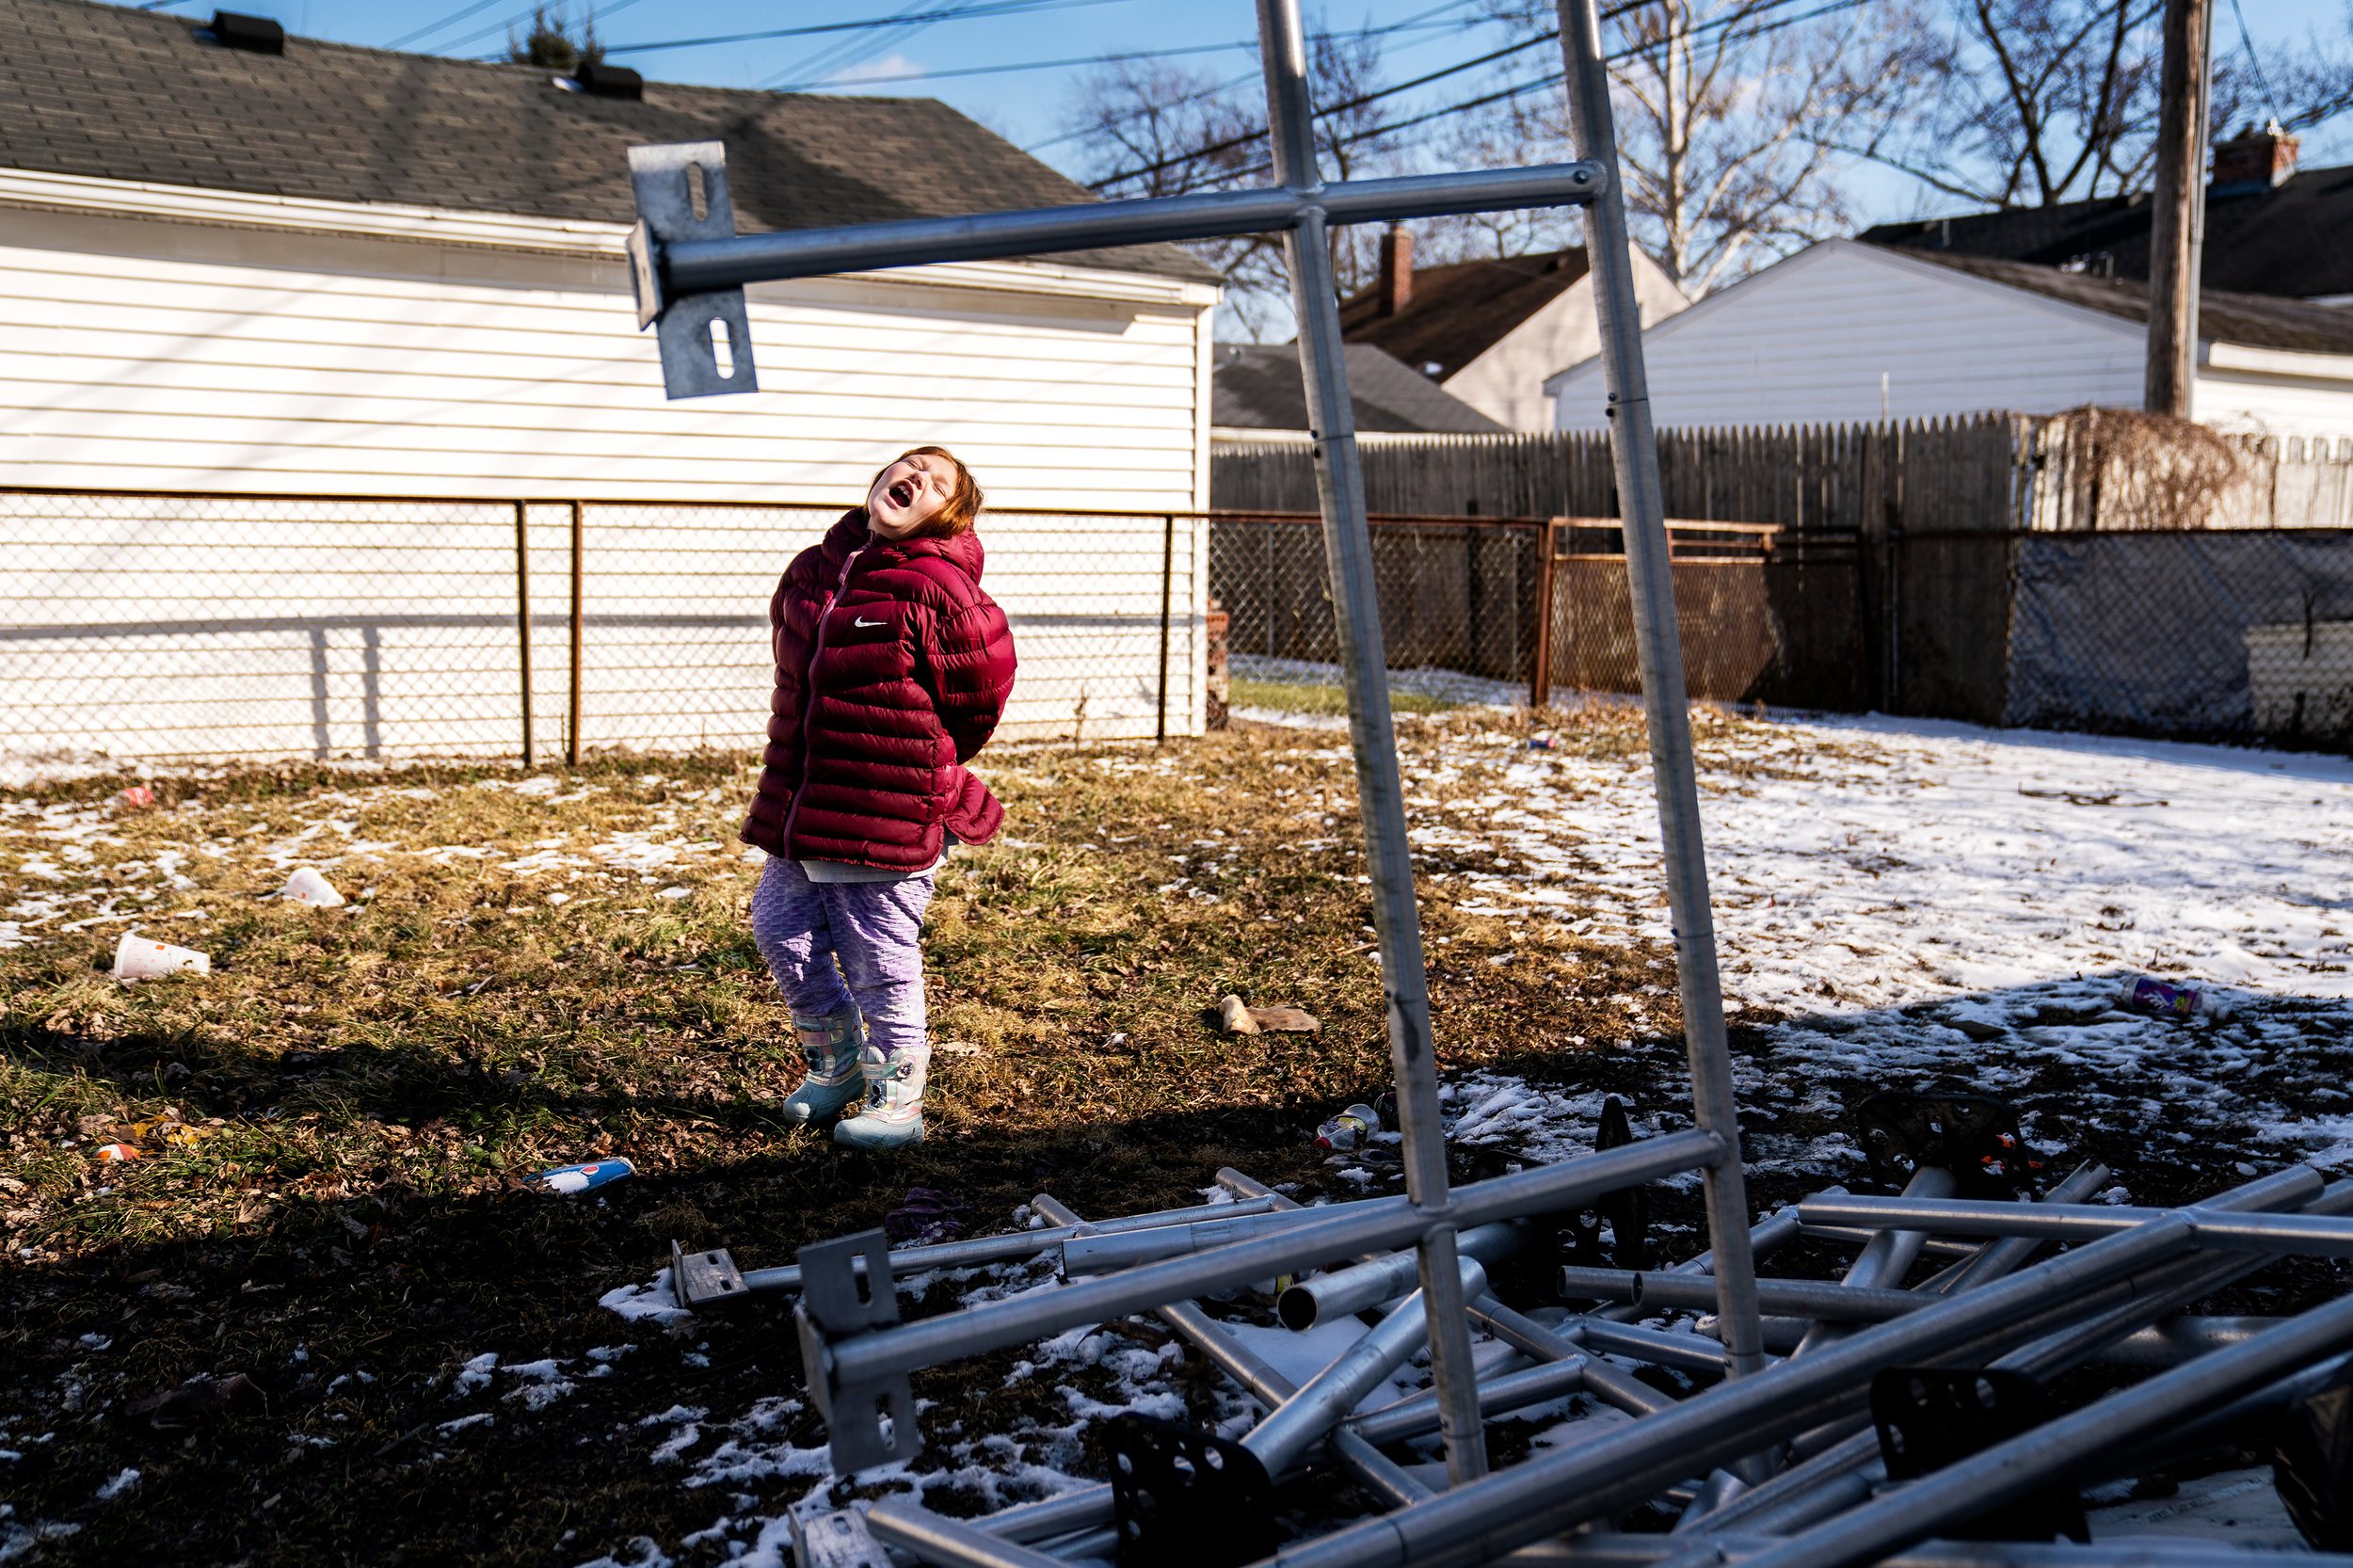  Mariah Ramsey, 7 plays with her imaginary friend next to her grandfathers handrails in the backyard of her home in Lincoln Park, Michigan. “We used to have a ramp for my father in the front of the house before he died. I’m hoping to sell it to get s